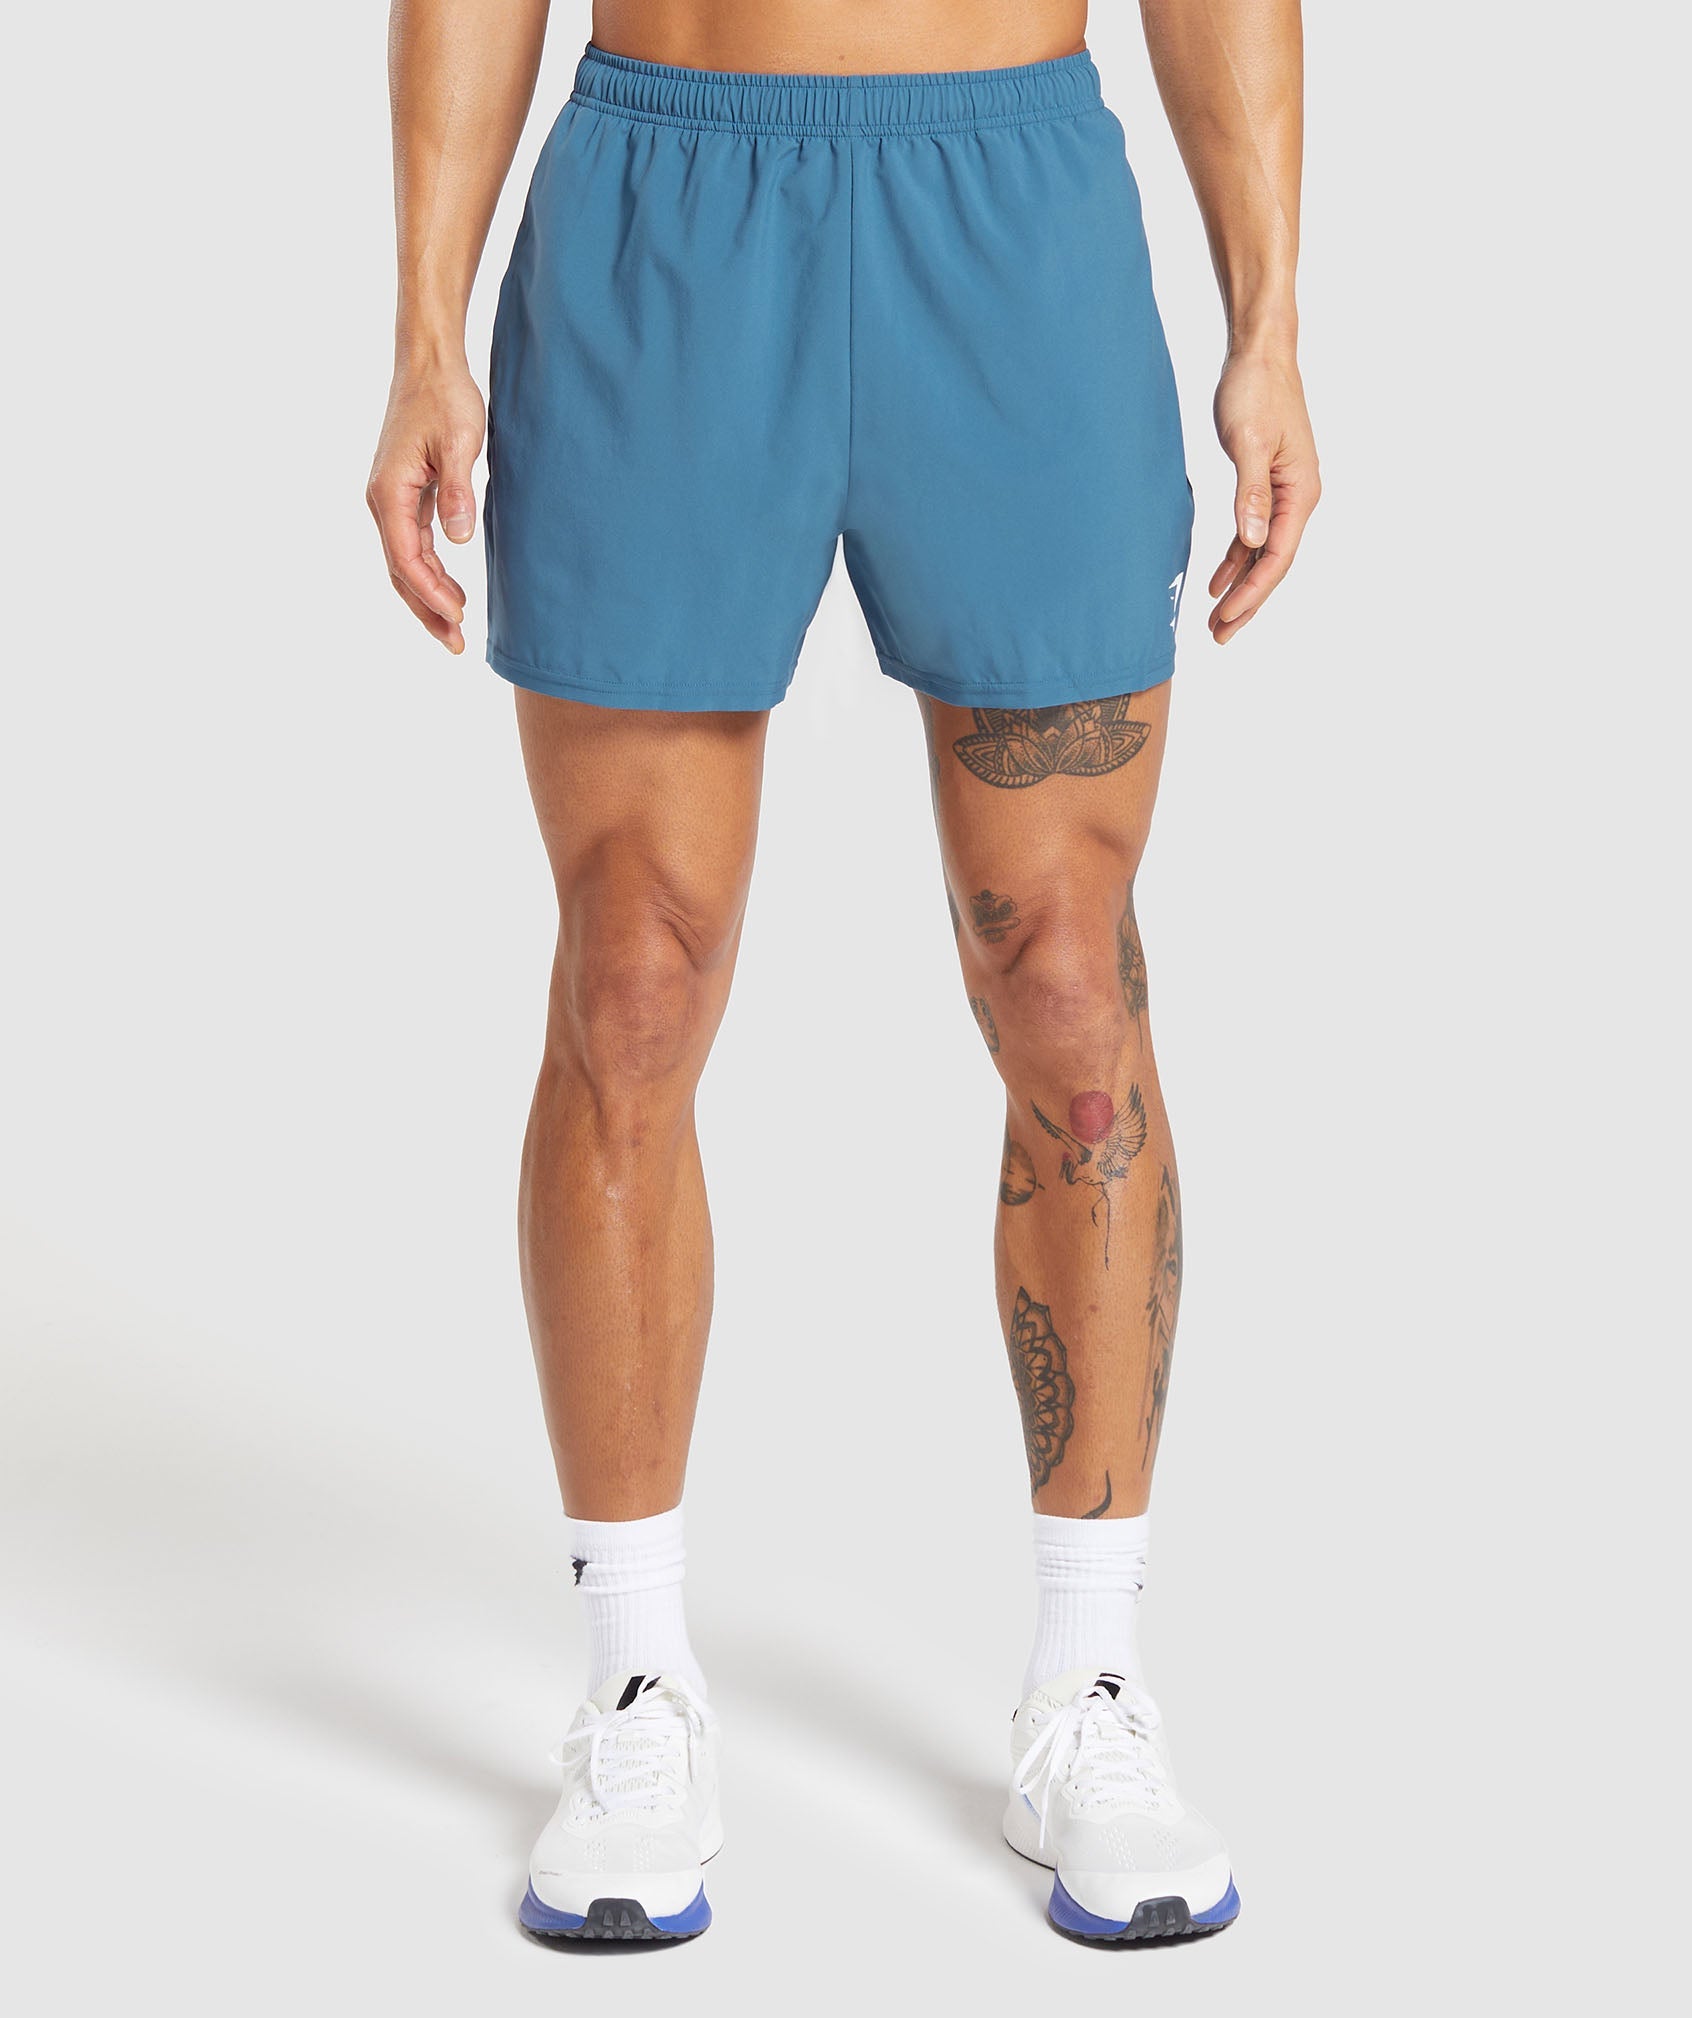 Arrival 5" Shorts in Utility Blue - view 1